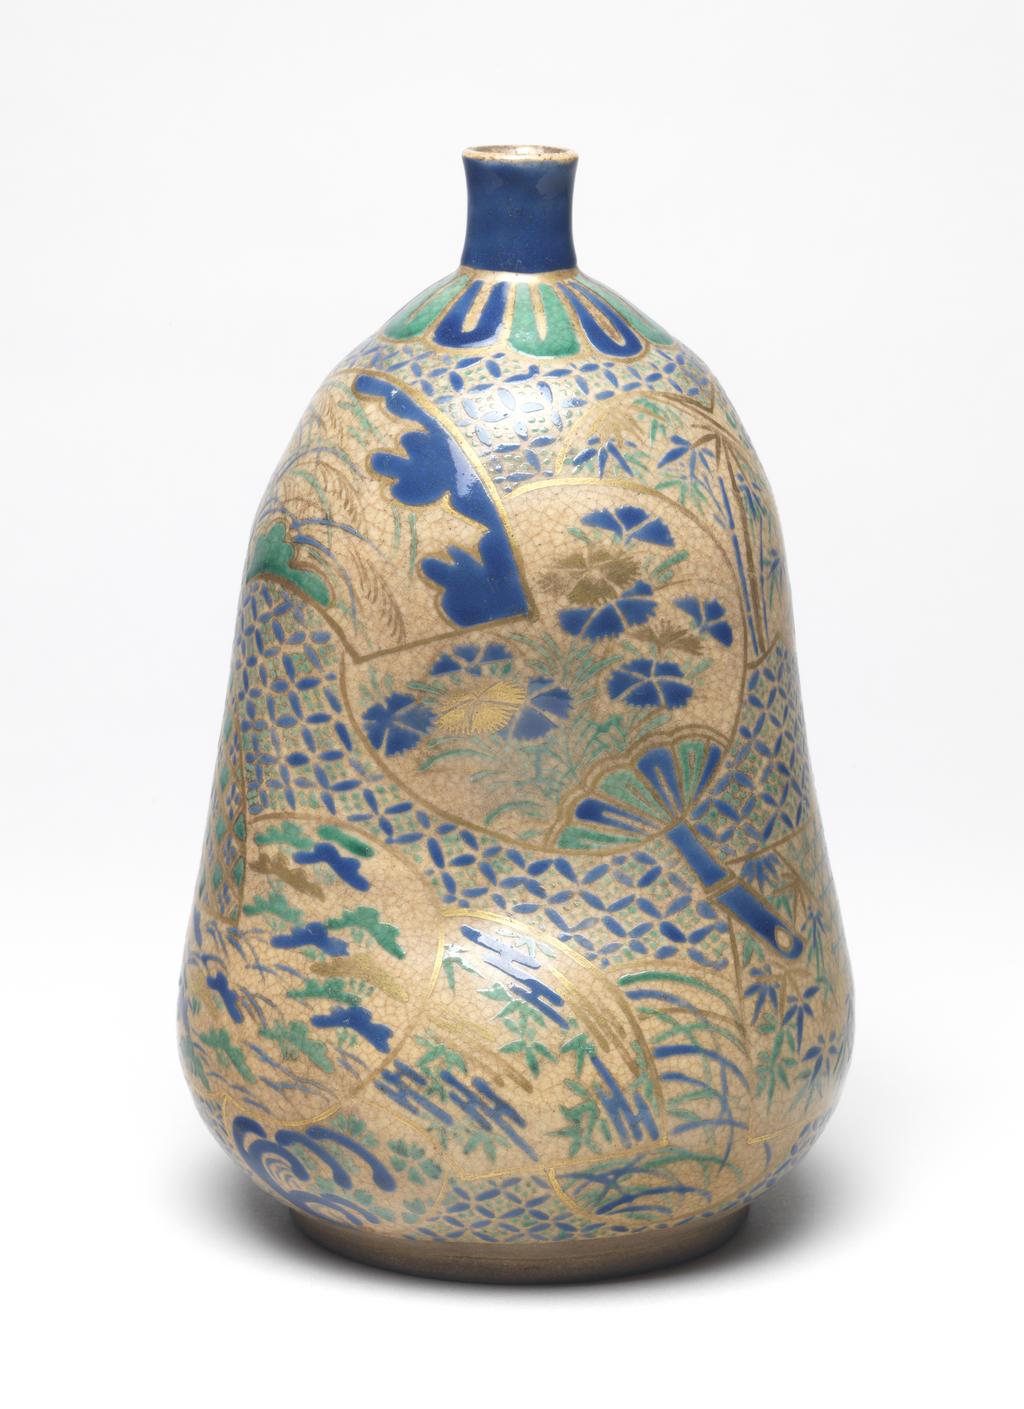 An image of Japanese pottery. Sake bottle. Awata ware. Unknown pottery, Japan, Kyoto. Footed bottle of gourd shape with narrow neck, thrown, turned and altered, with two indentations on one side. Decorated with light buff glaze and overglaze enamels of varied floral decoration in blue, green and gold, displayed in fan shaped panels on a SHIPPO background. Stoneware, glazed, height, whole, 19.90 cm, diameter, rim, 2.00 cm, diameter, bottle, 12.50 cm, diameter, foot, 8.60 cm, circa 1700-circa 1799. Edo Period (1615-1868).